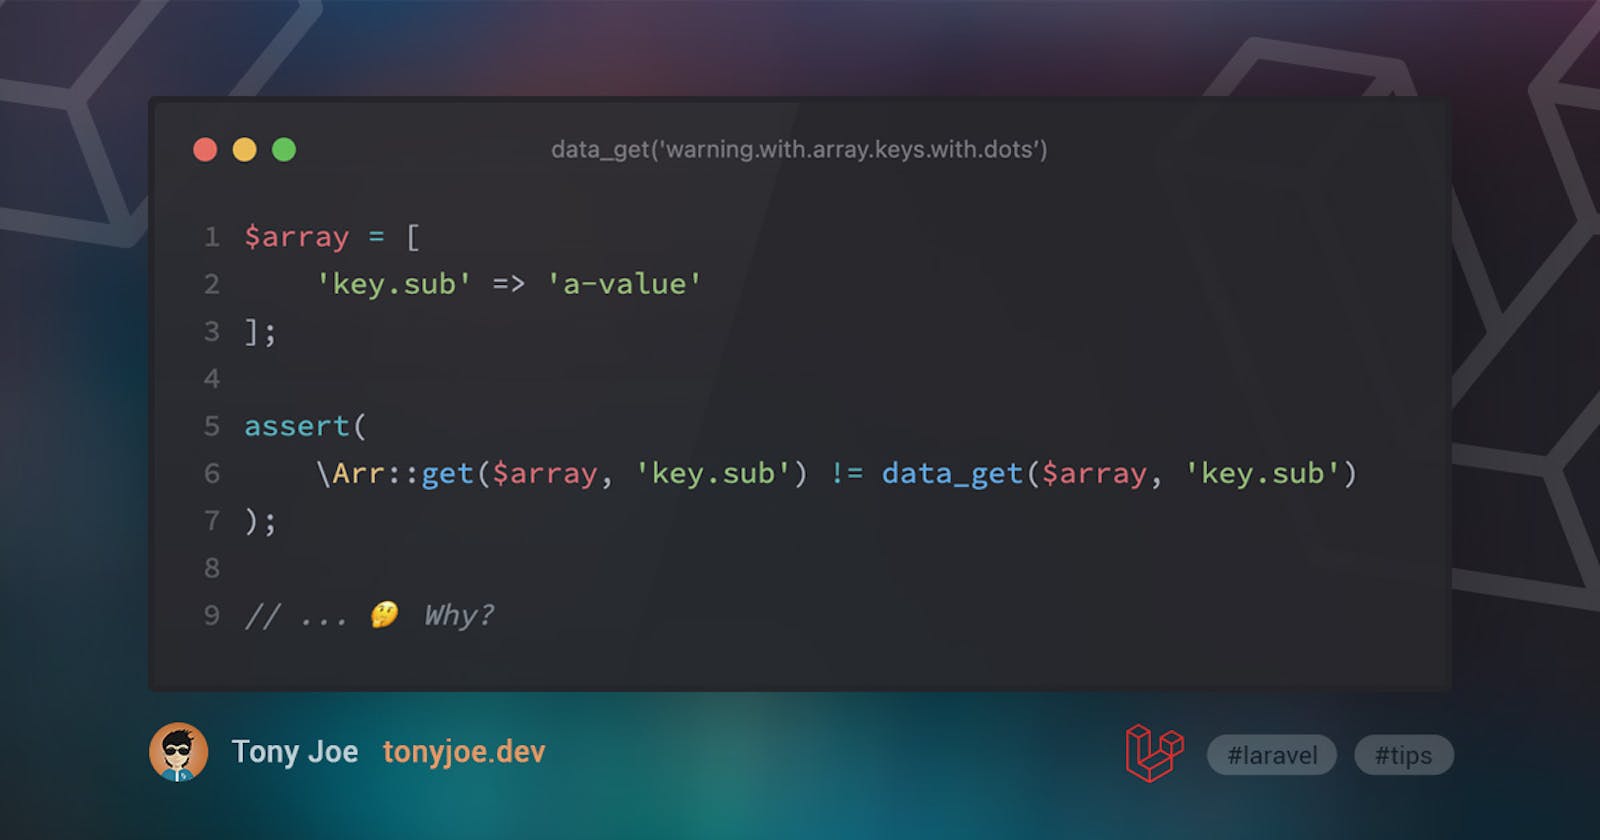 data_get(): Warning with array keys with dots - Laravel Tips